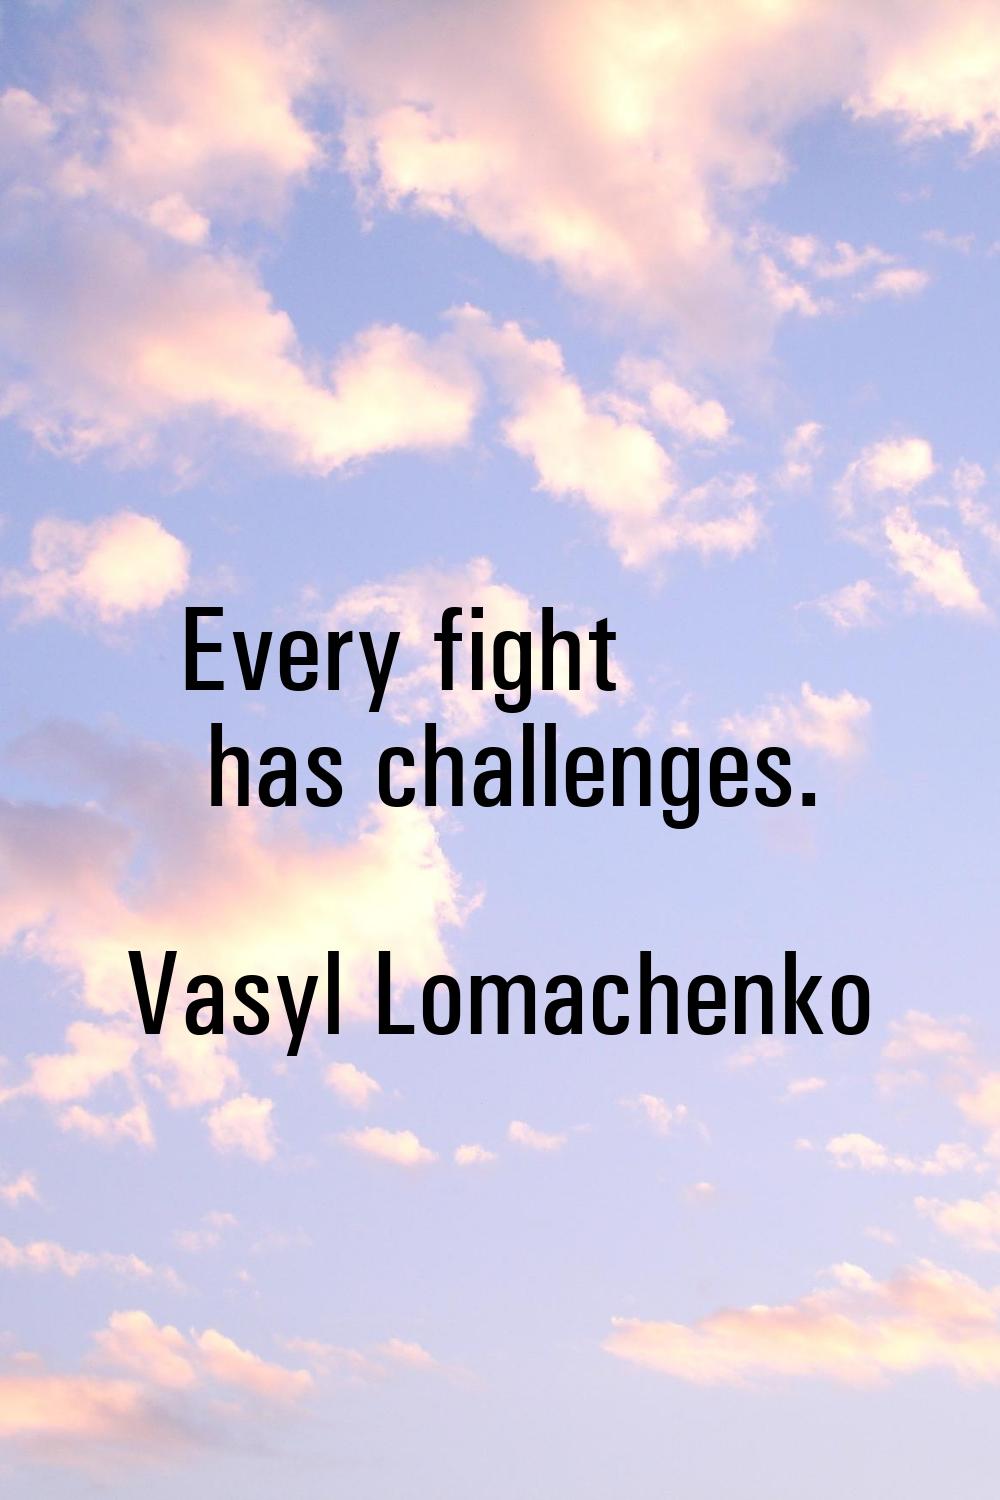 Every fight has challenges.